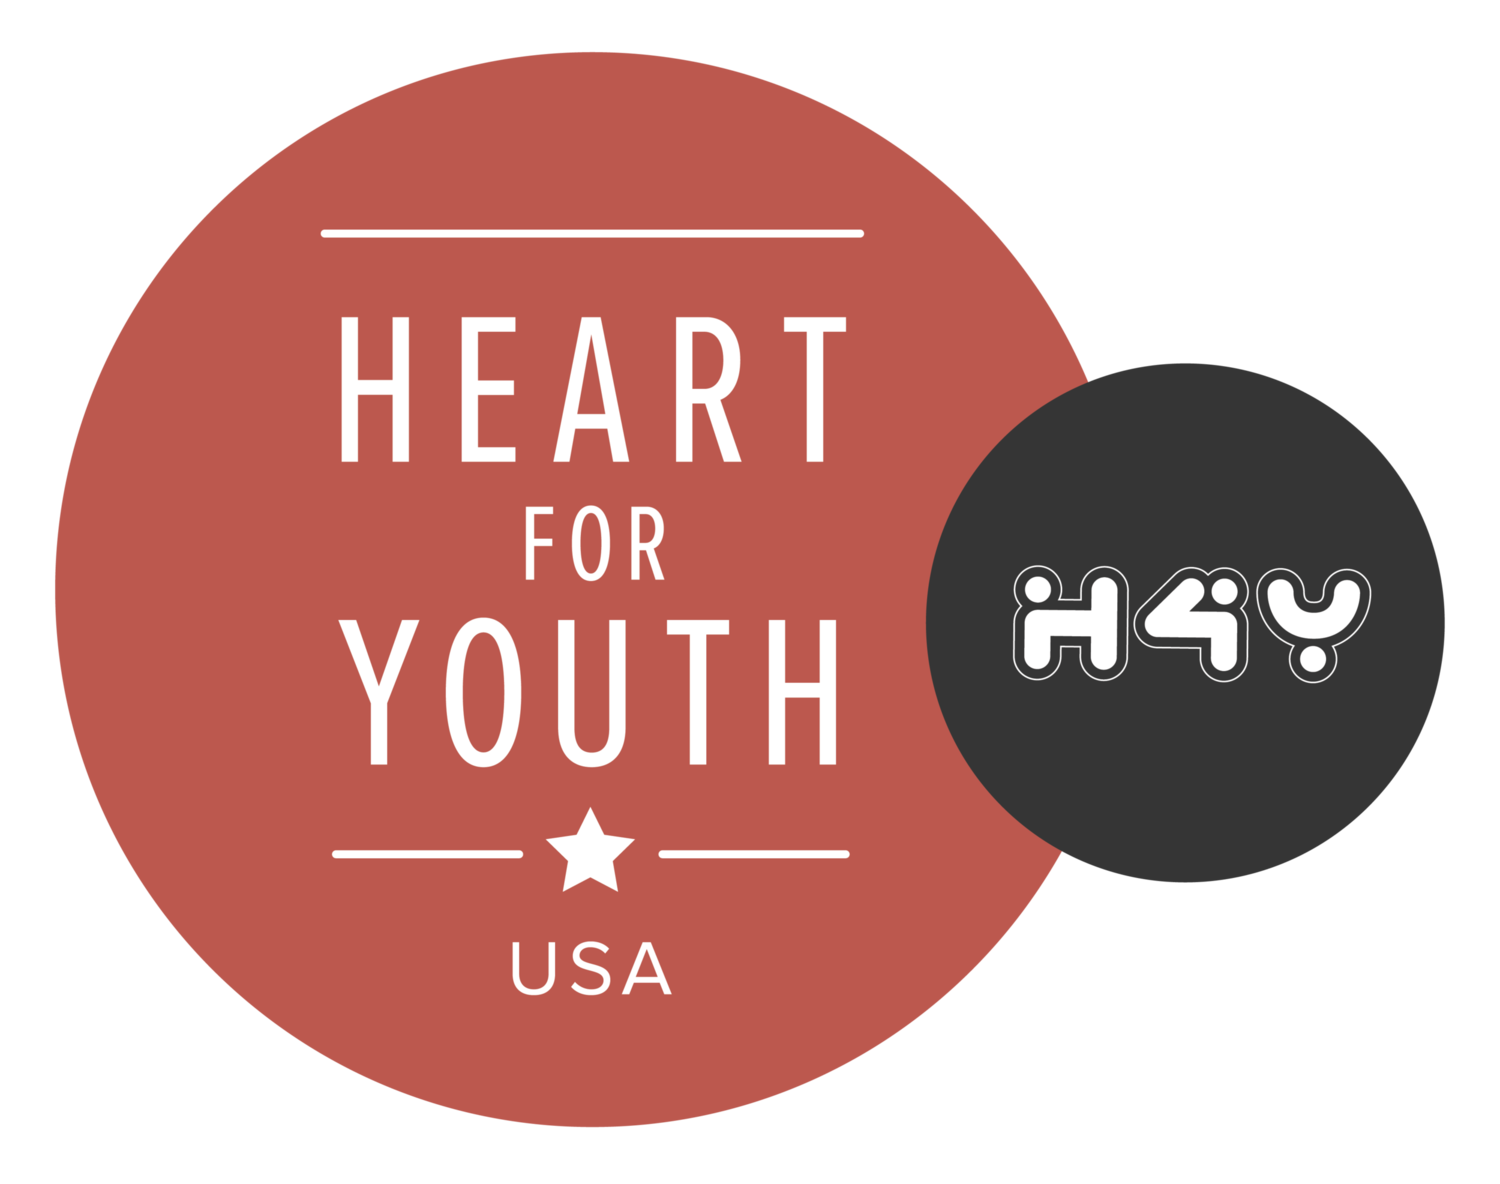 Heart for Youth USA